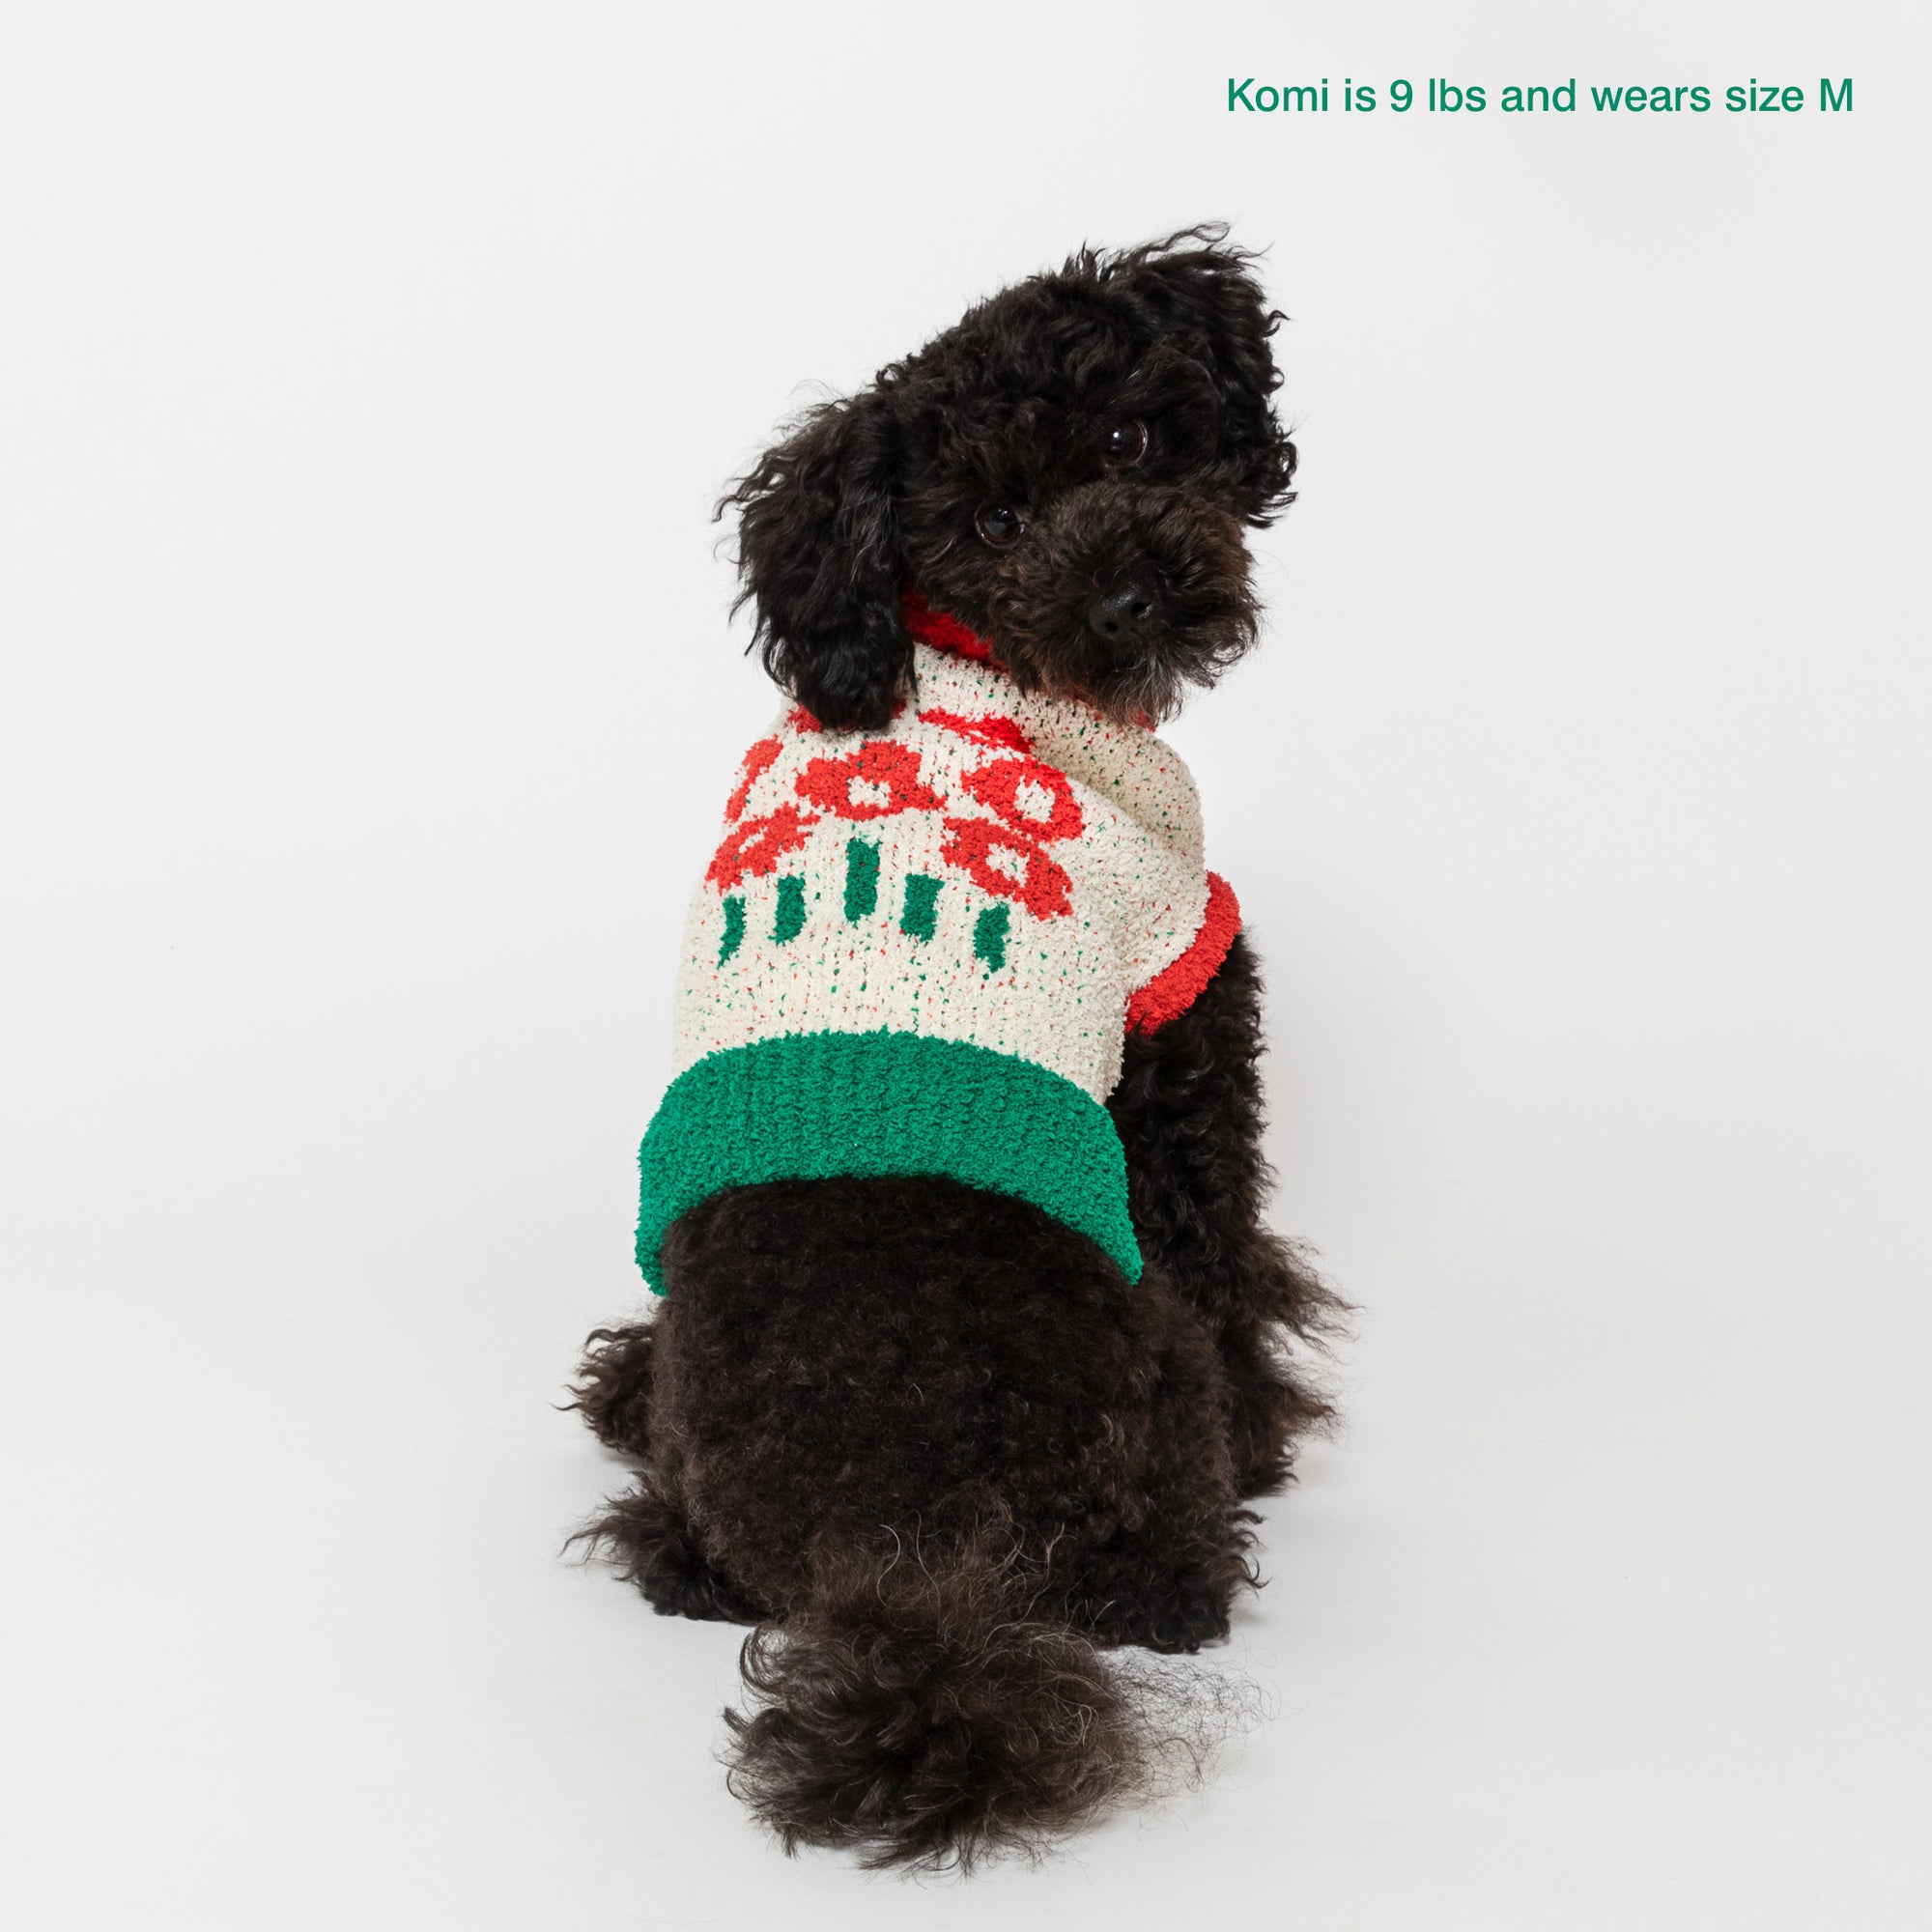 Poodle named Komi, 9 lbs, in medium "The Furryfolks" flower sweater, against a white backdrop.